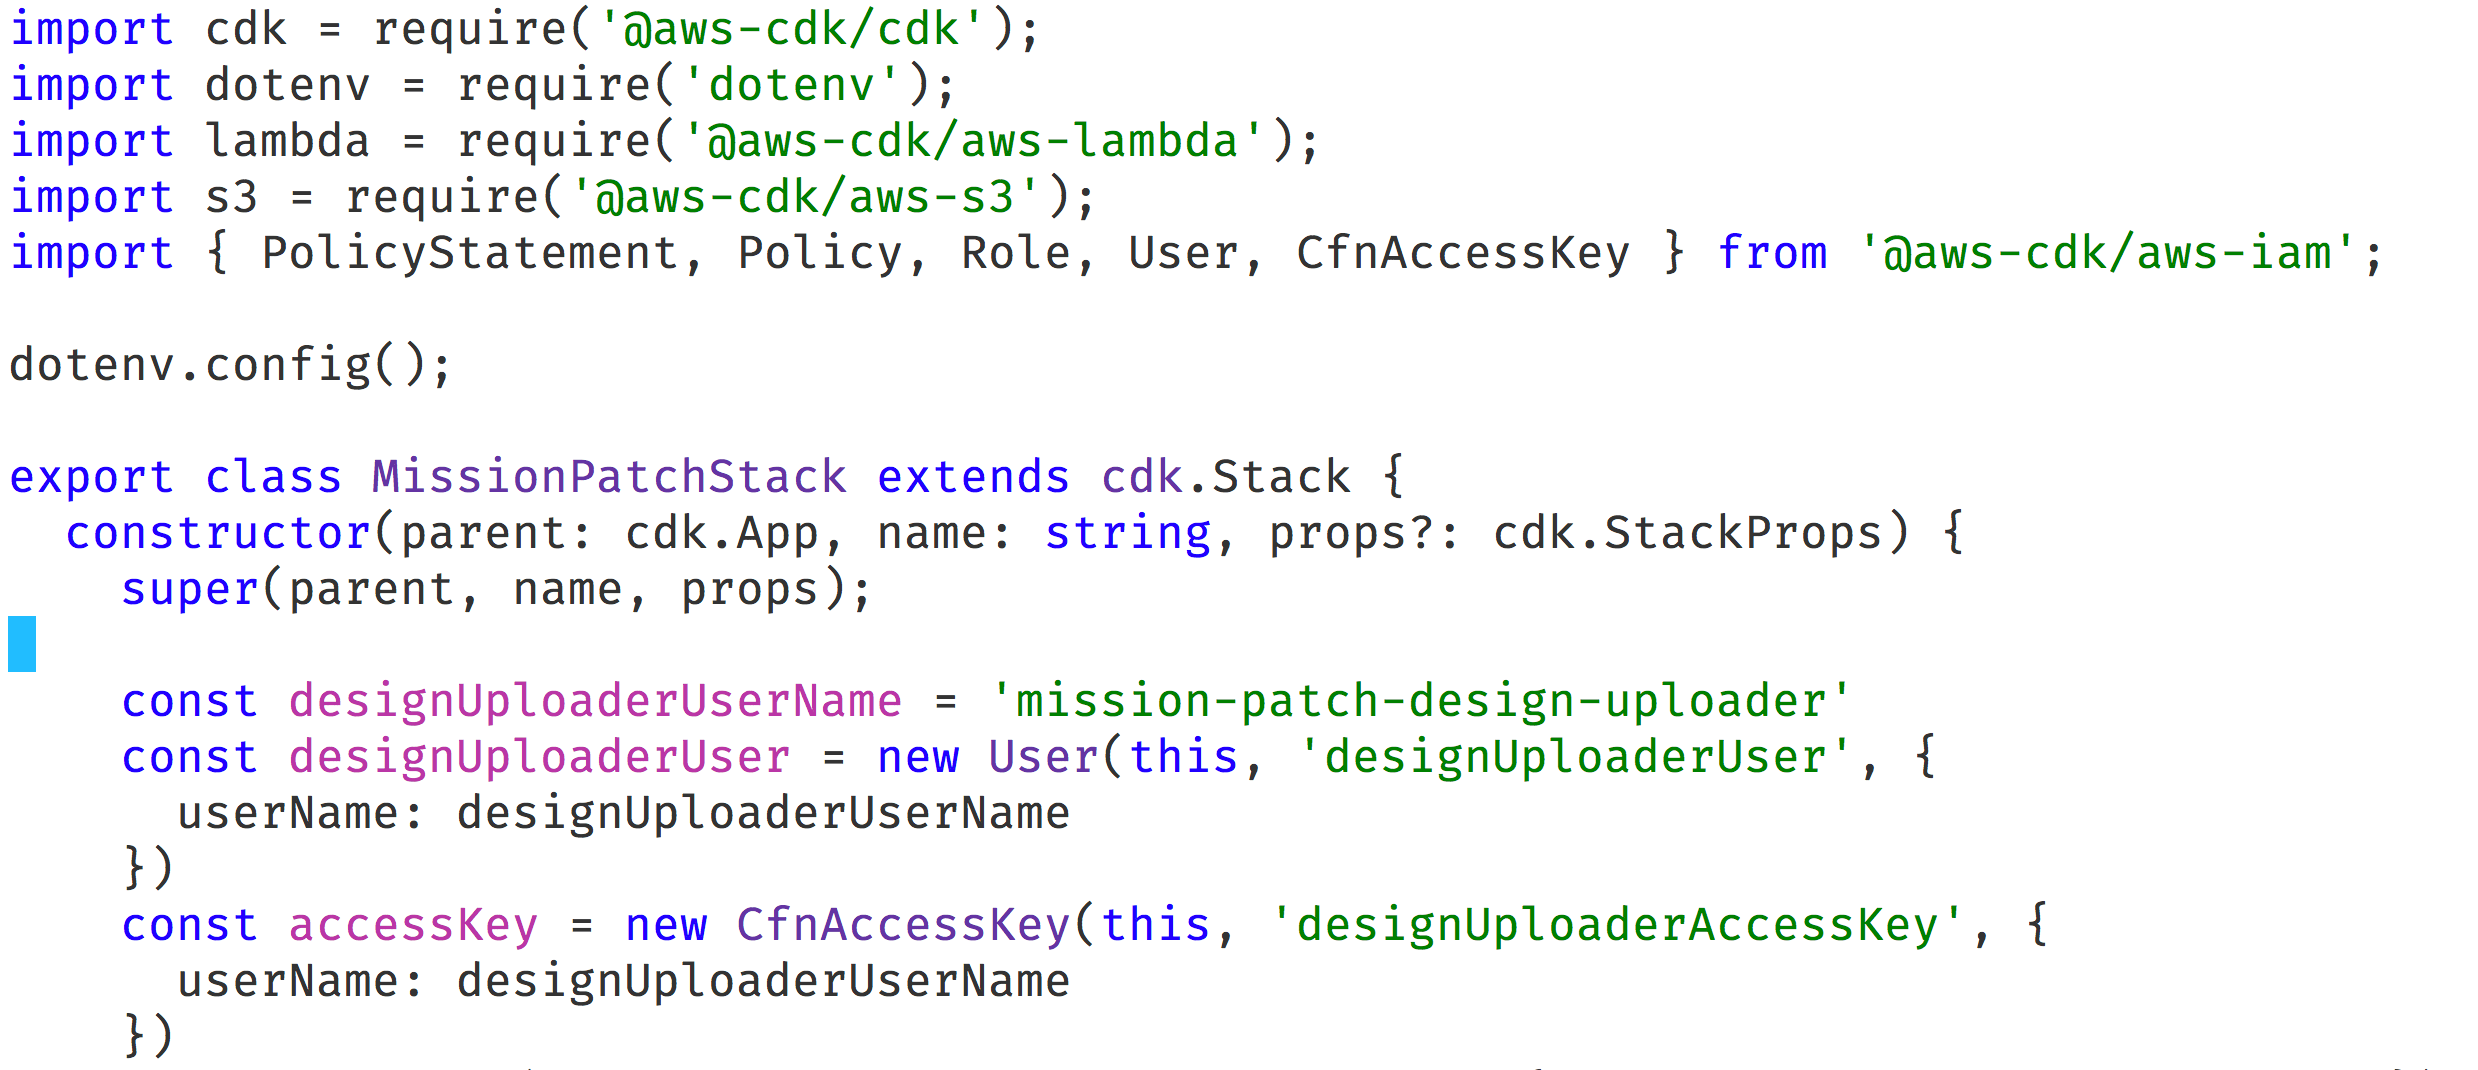 An example of CDK code